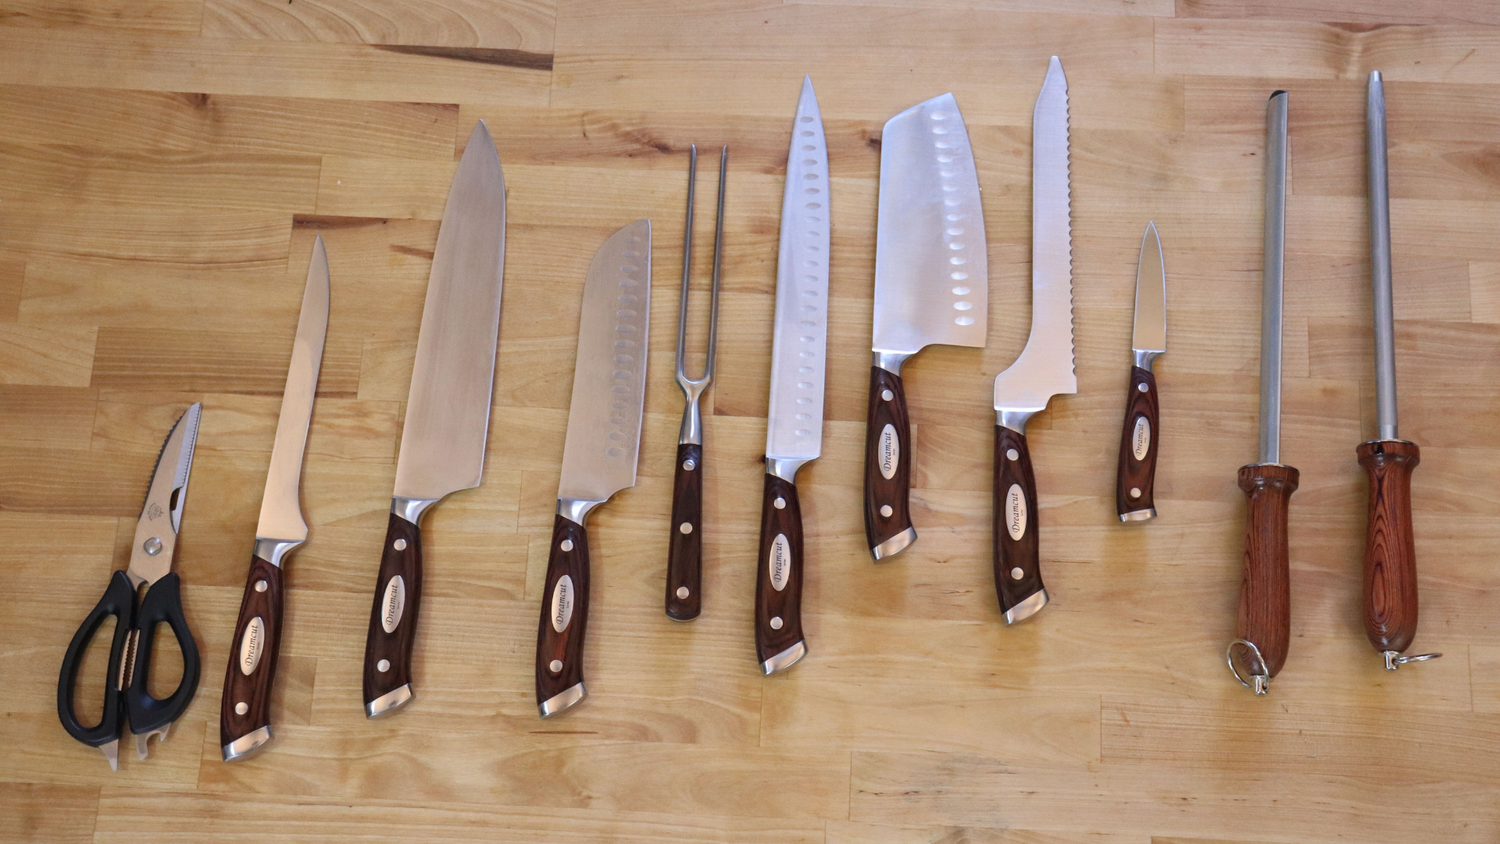 Buy 19 pc set- 12 pc set plus steak knives, order today and get a free –  Bavarian Knife Works